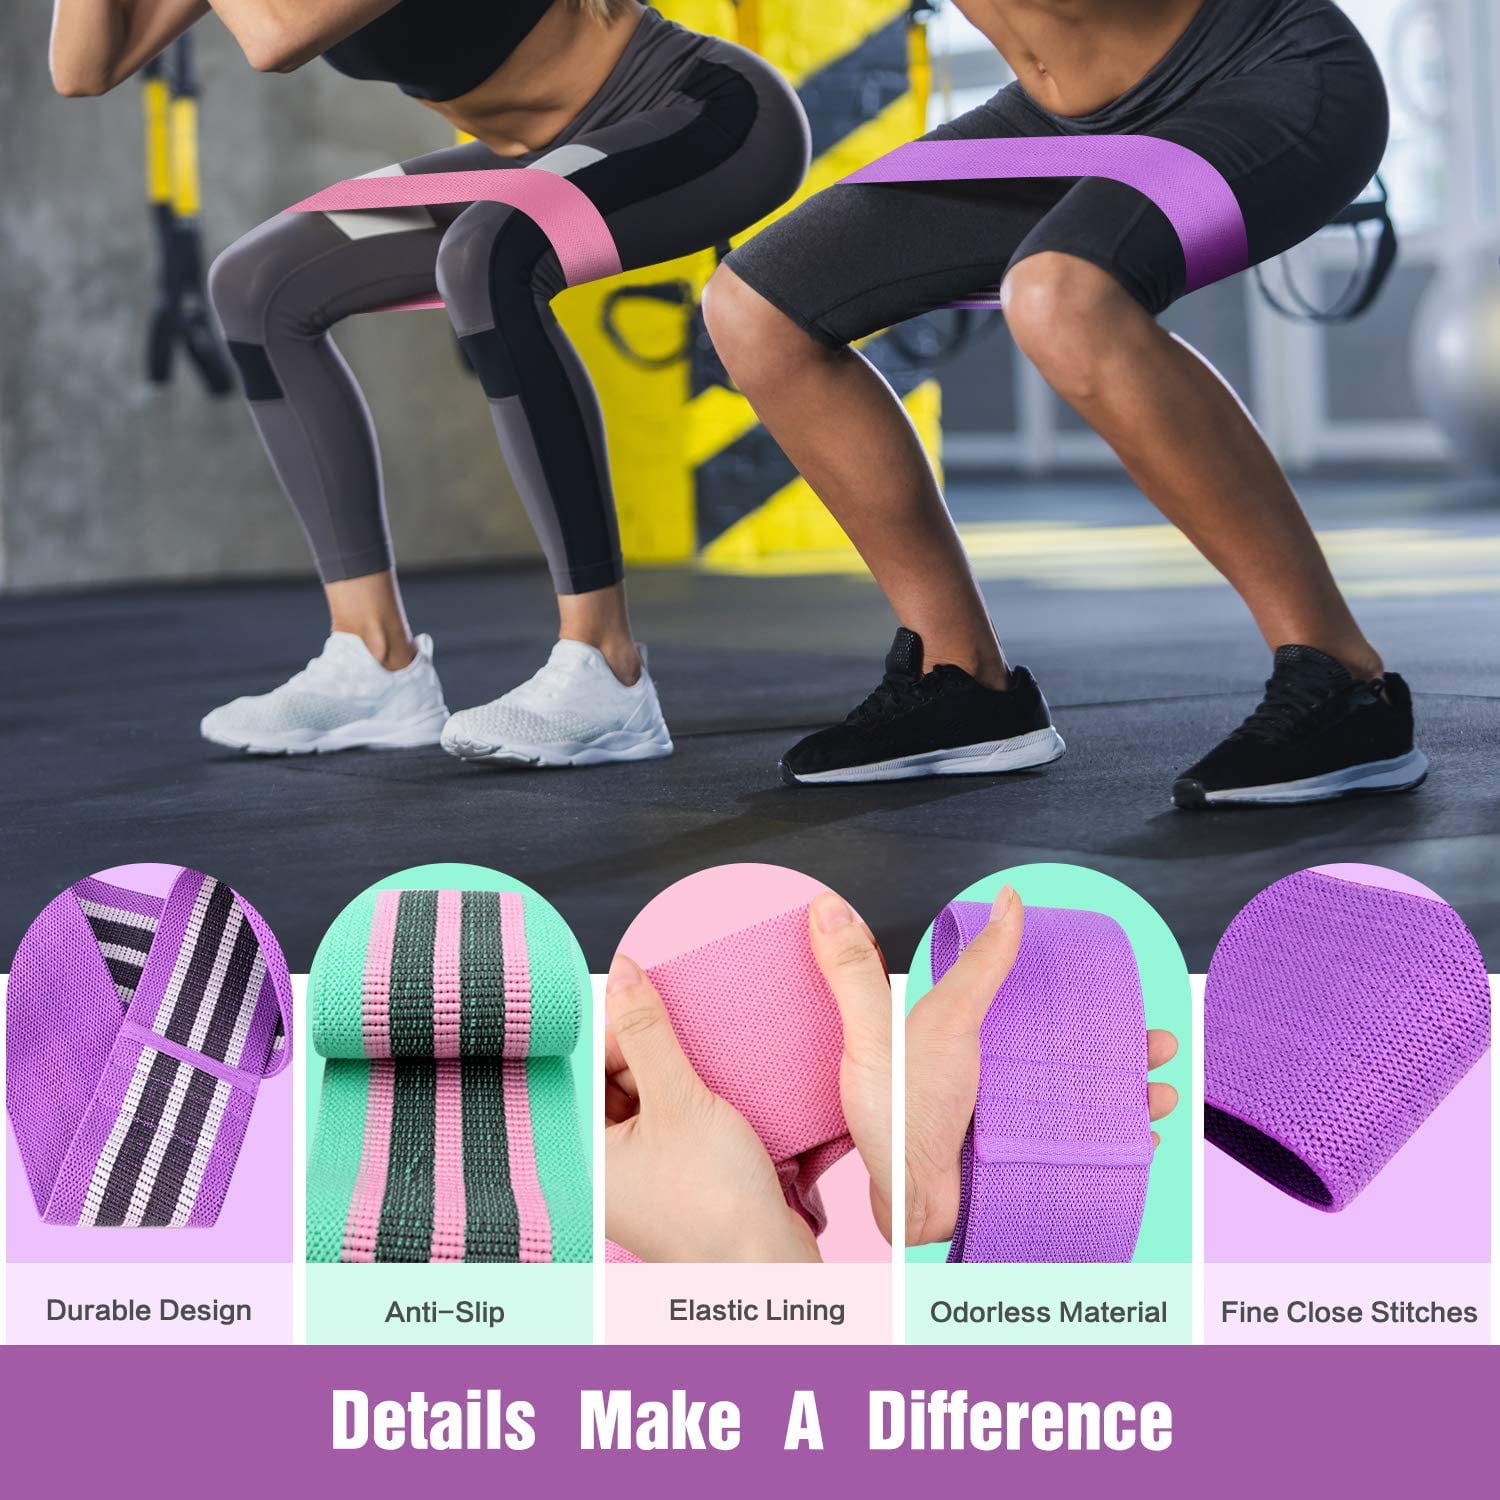 Non-Slip Fitness Bands for Women Elastic Fabric Sports Band for Squat/Glute/Hip/Thigh Loop Exercise Bands Resistance Bands for Legs and Butt 3 Resistant Levels Booty Workout Bands 